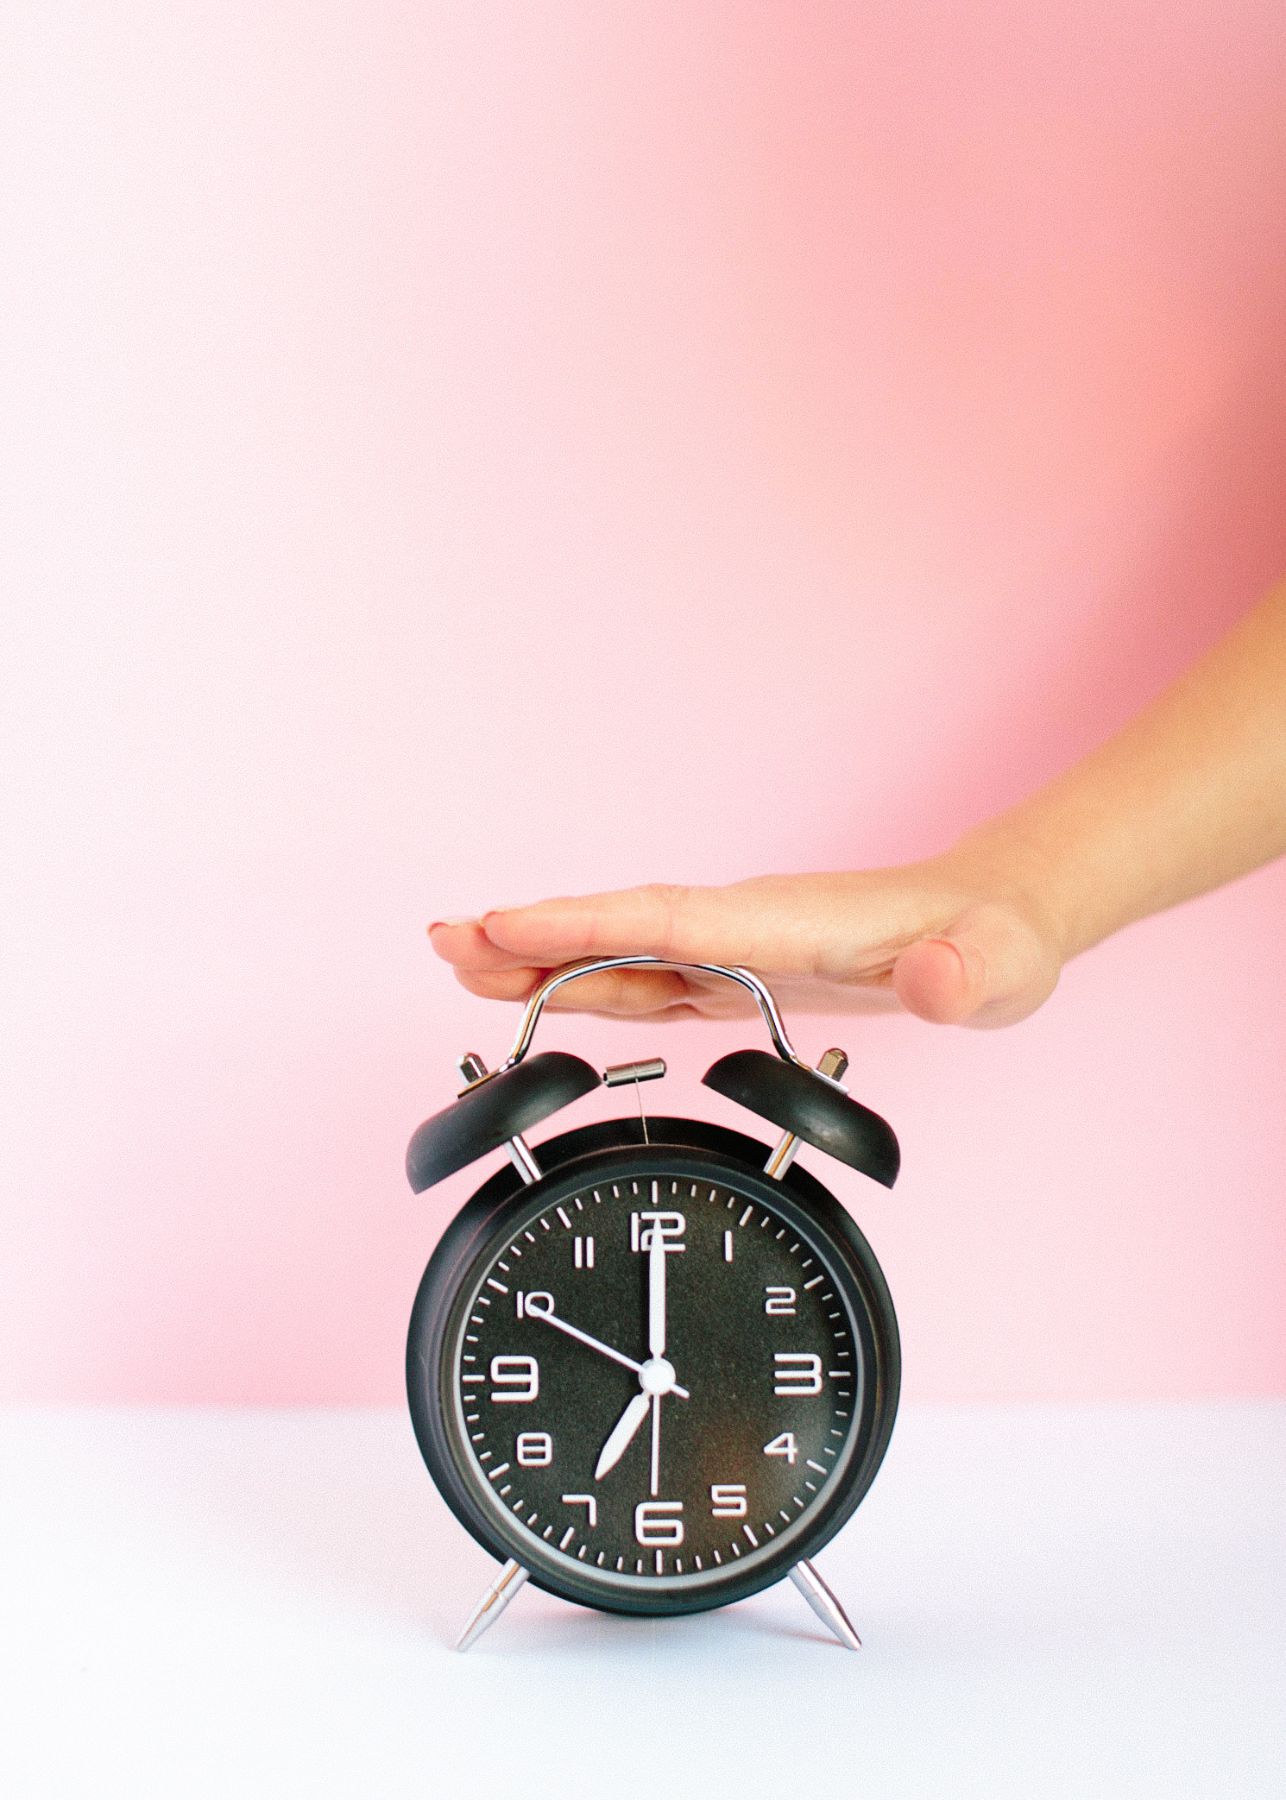 hand on top of black alarm clock with a pink background